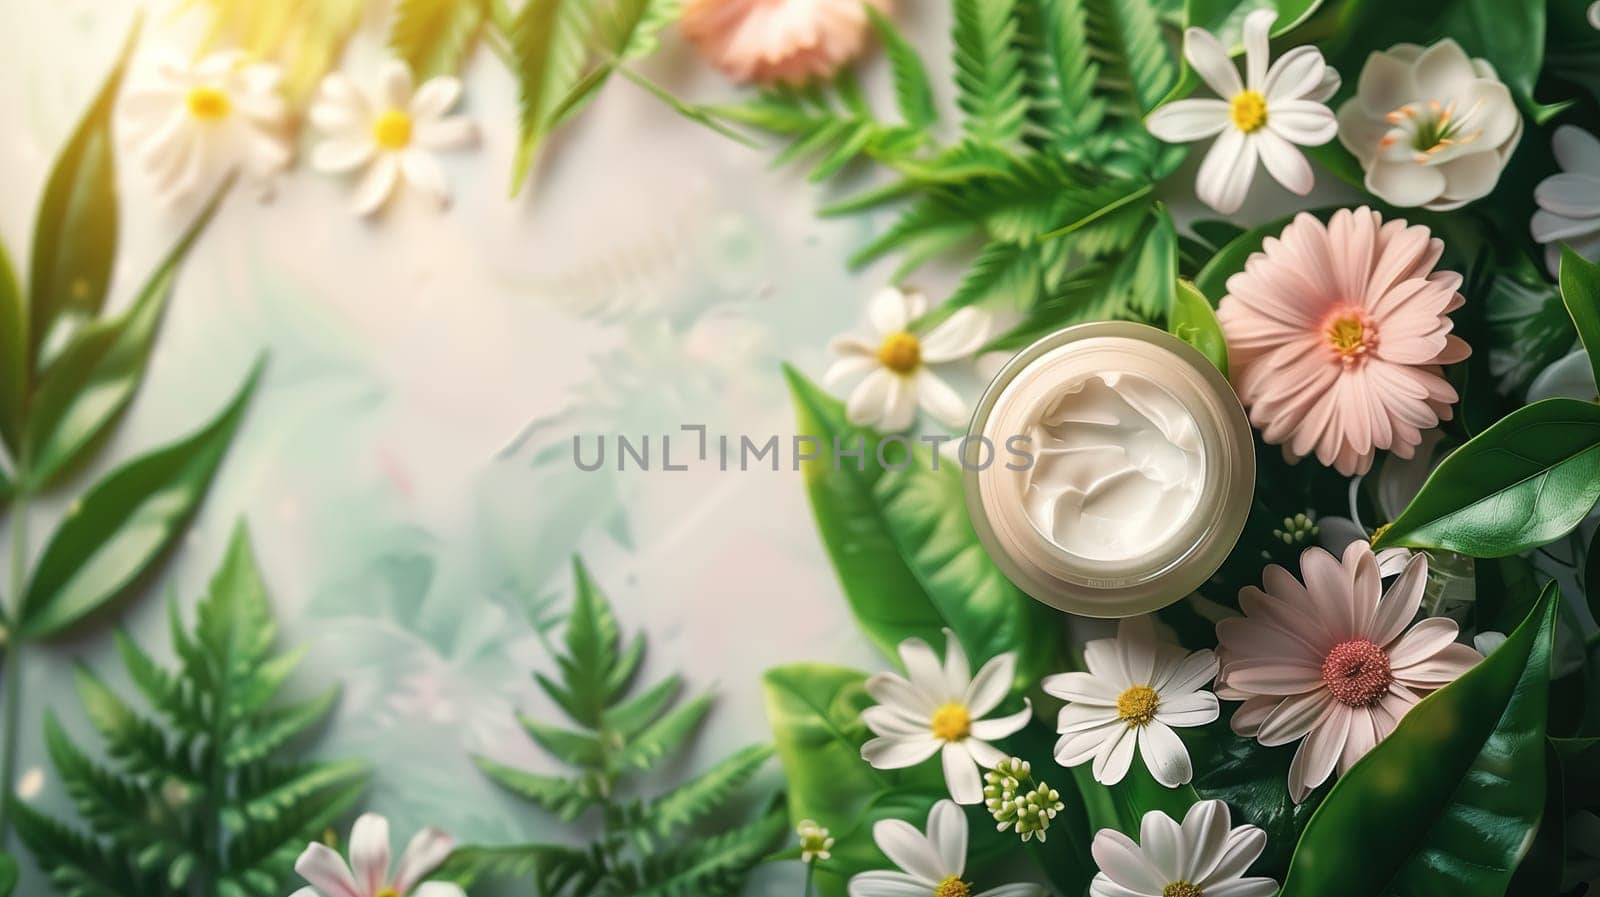 A bottle of cream is perched on top of a vibrant green plant, standing out against the natural backdrop. The creamy bottle contrasts with the green foliage, creating a simple yet striking visual.